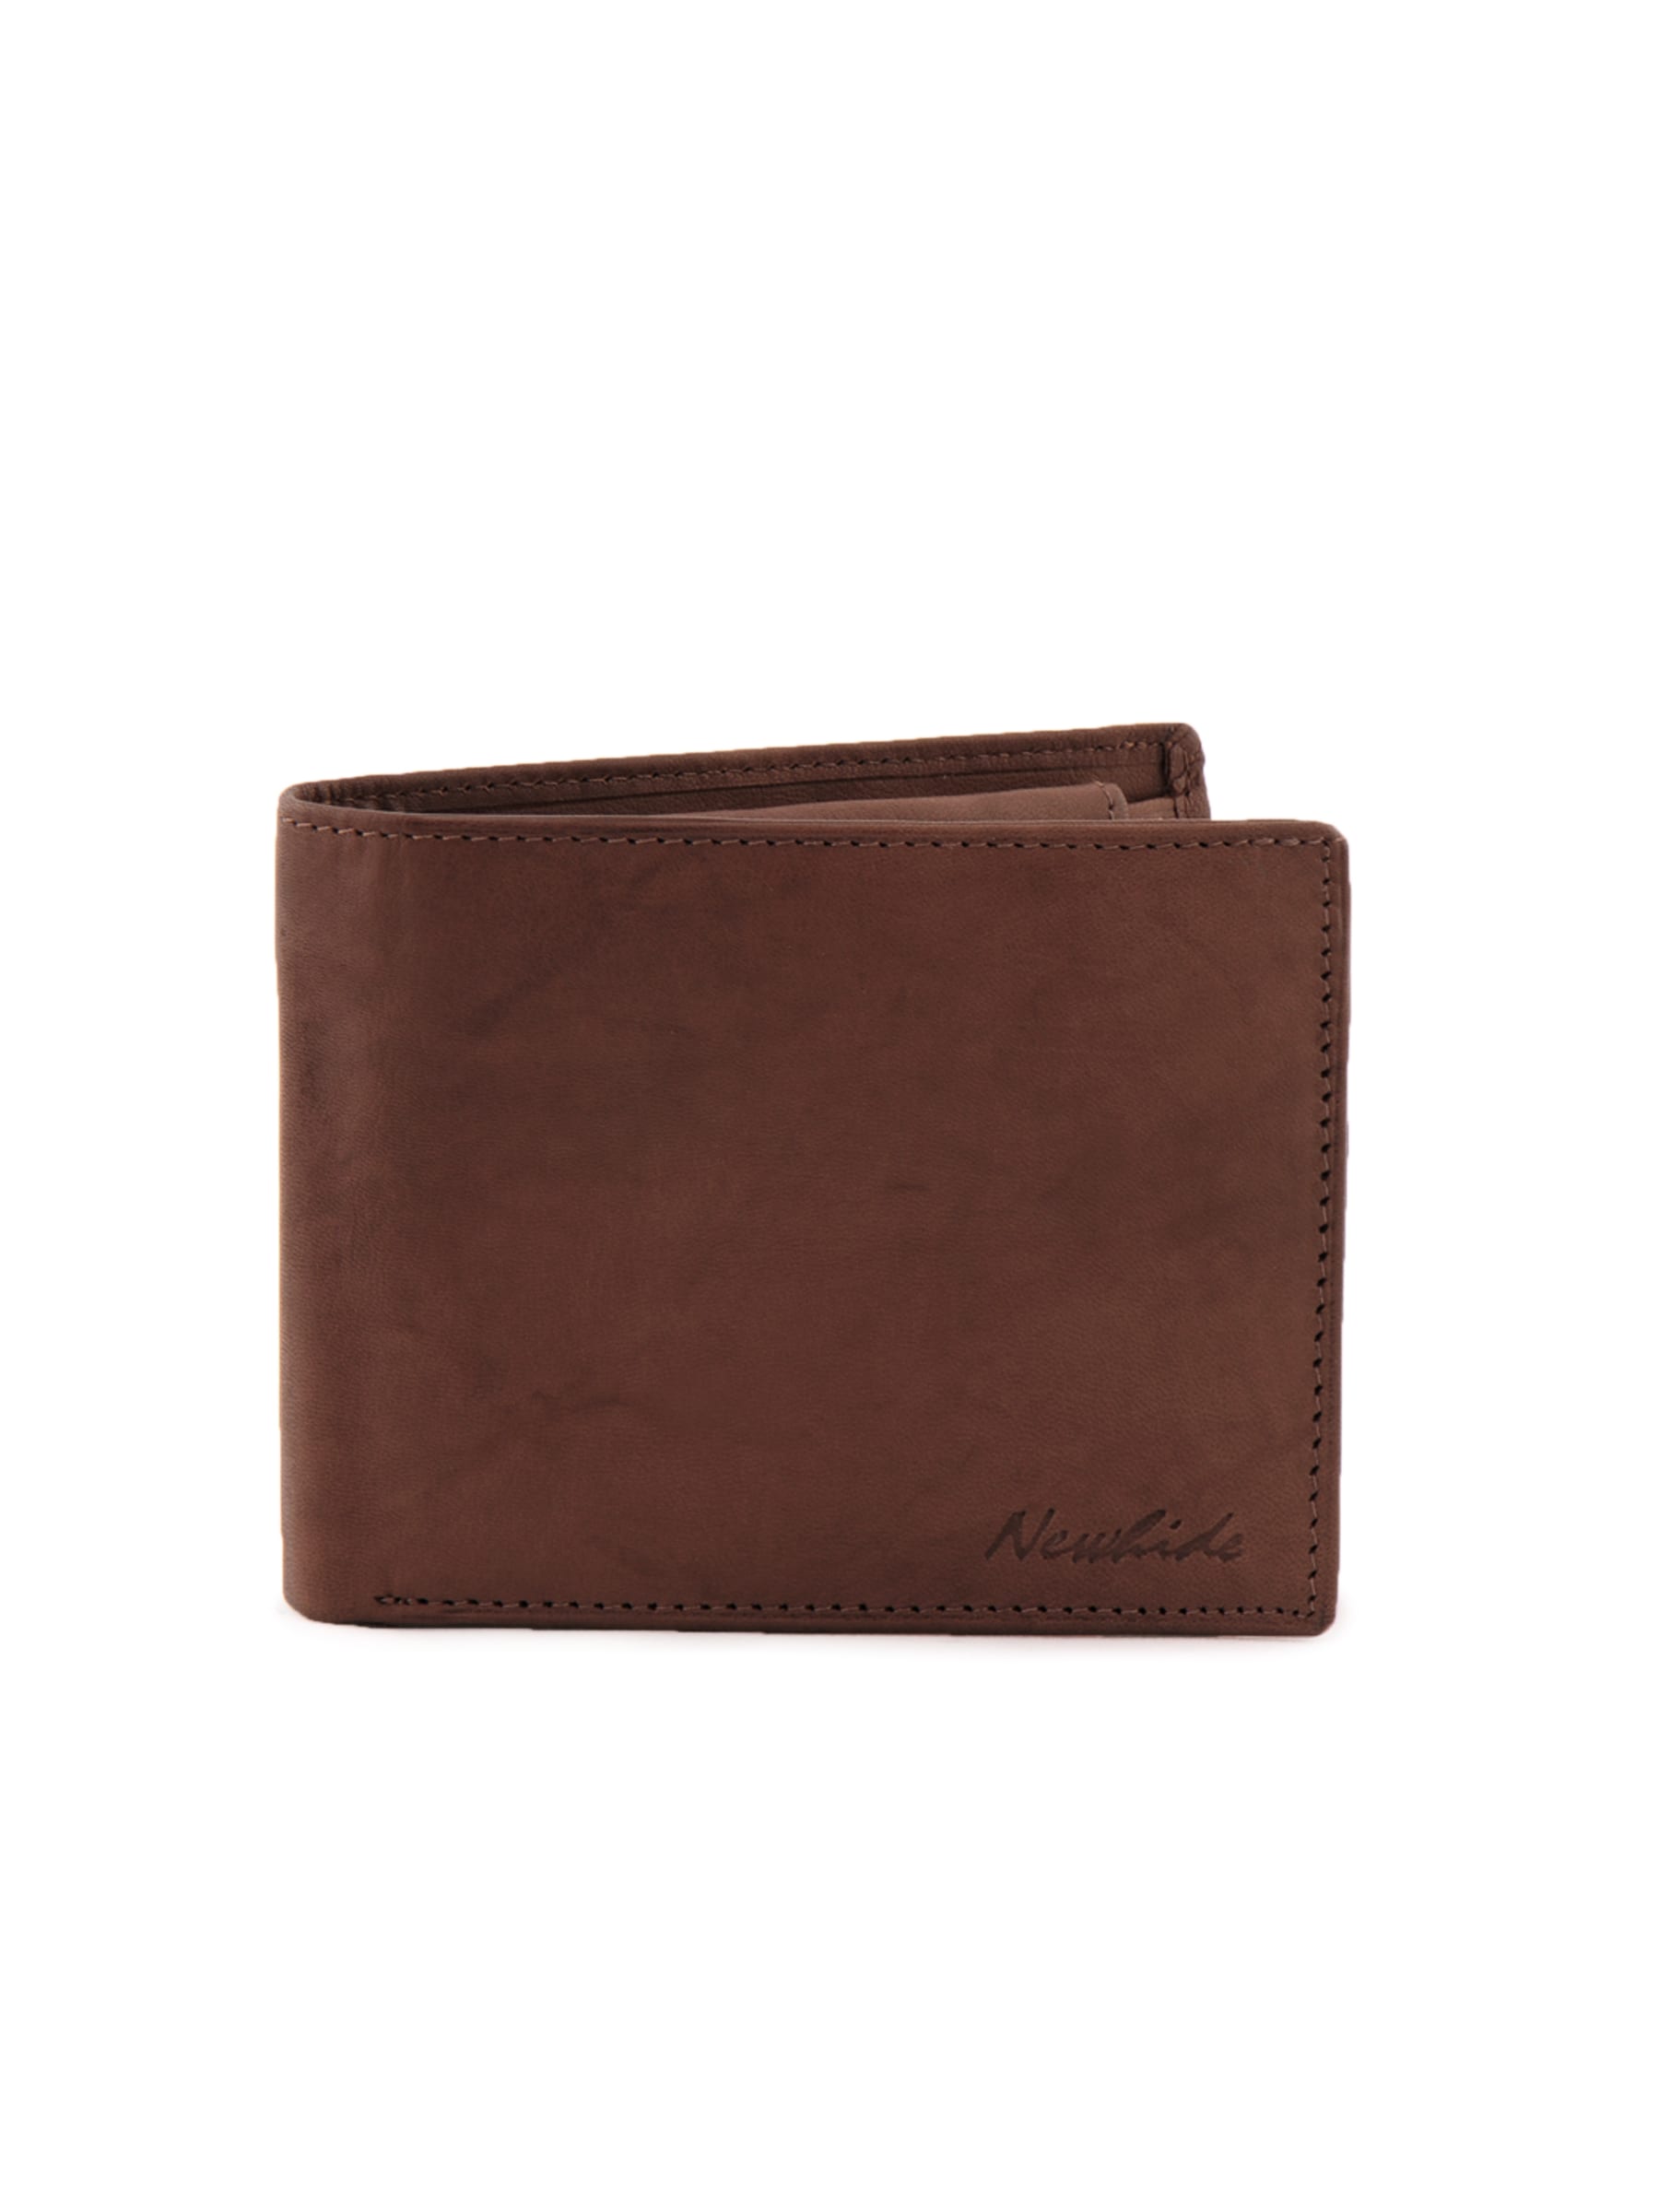 Newhide Smooth Finish Wallet